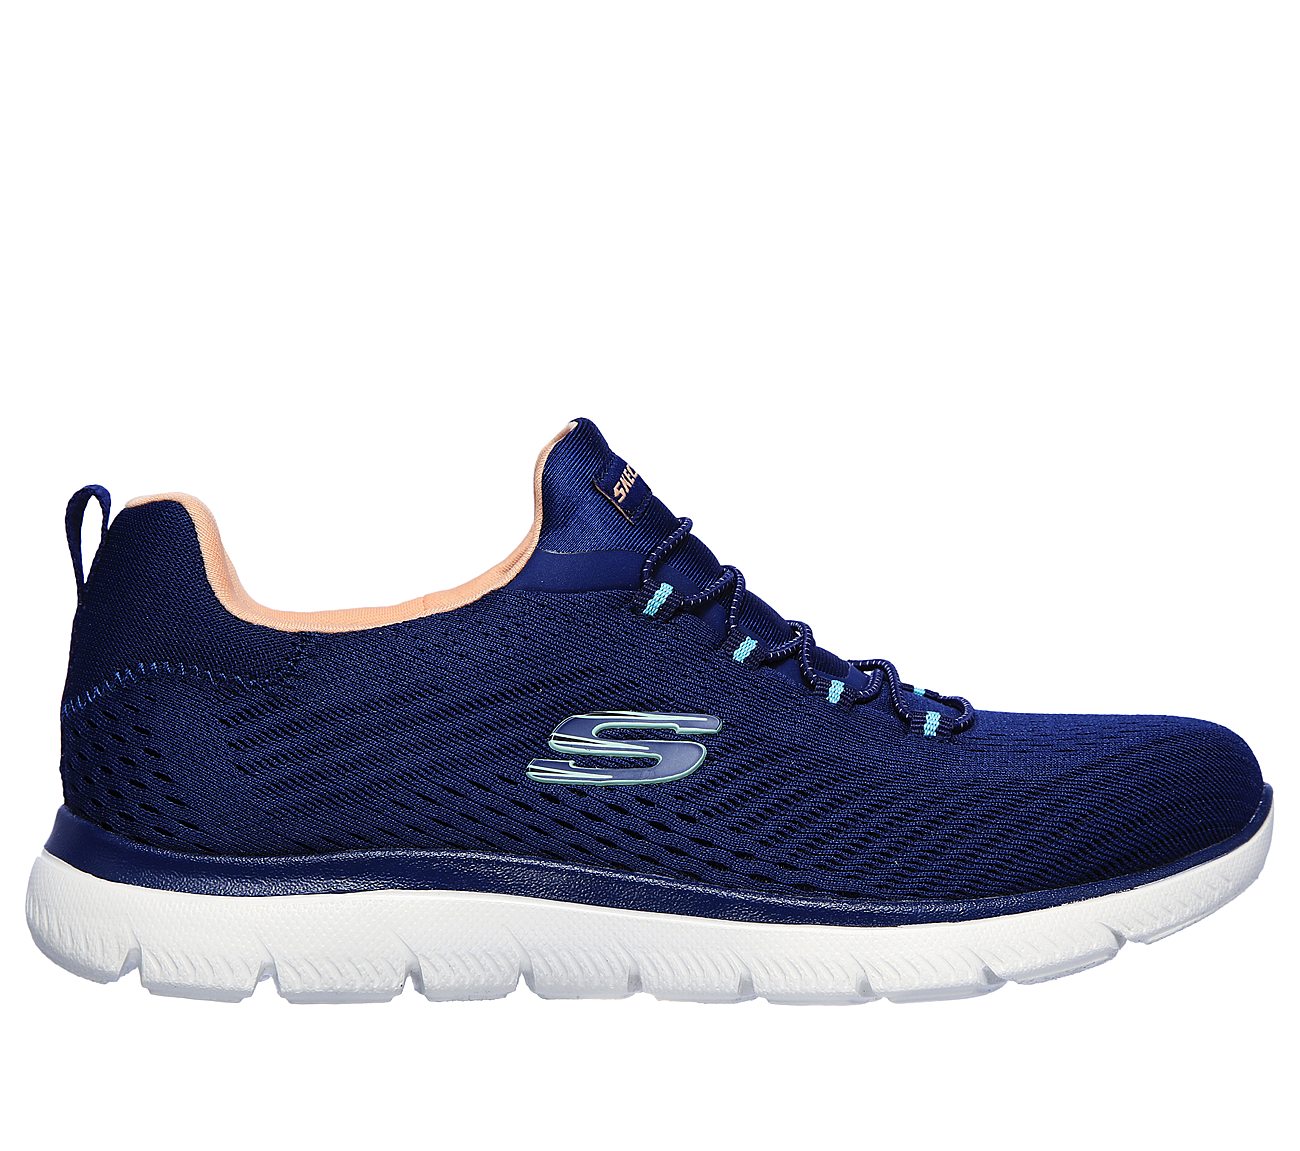 SUMMITS - FAST ATTRACTION, NAVY/CORAL Footwear Lateral View